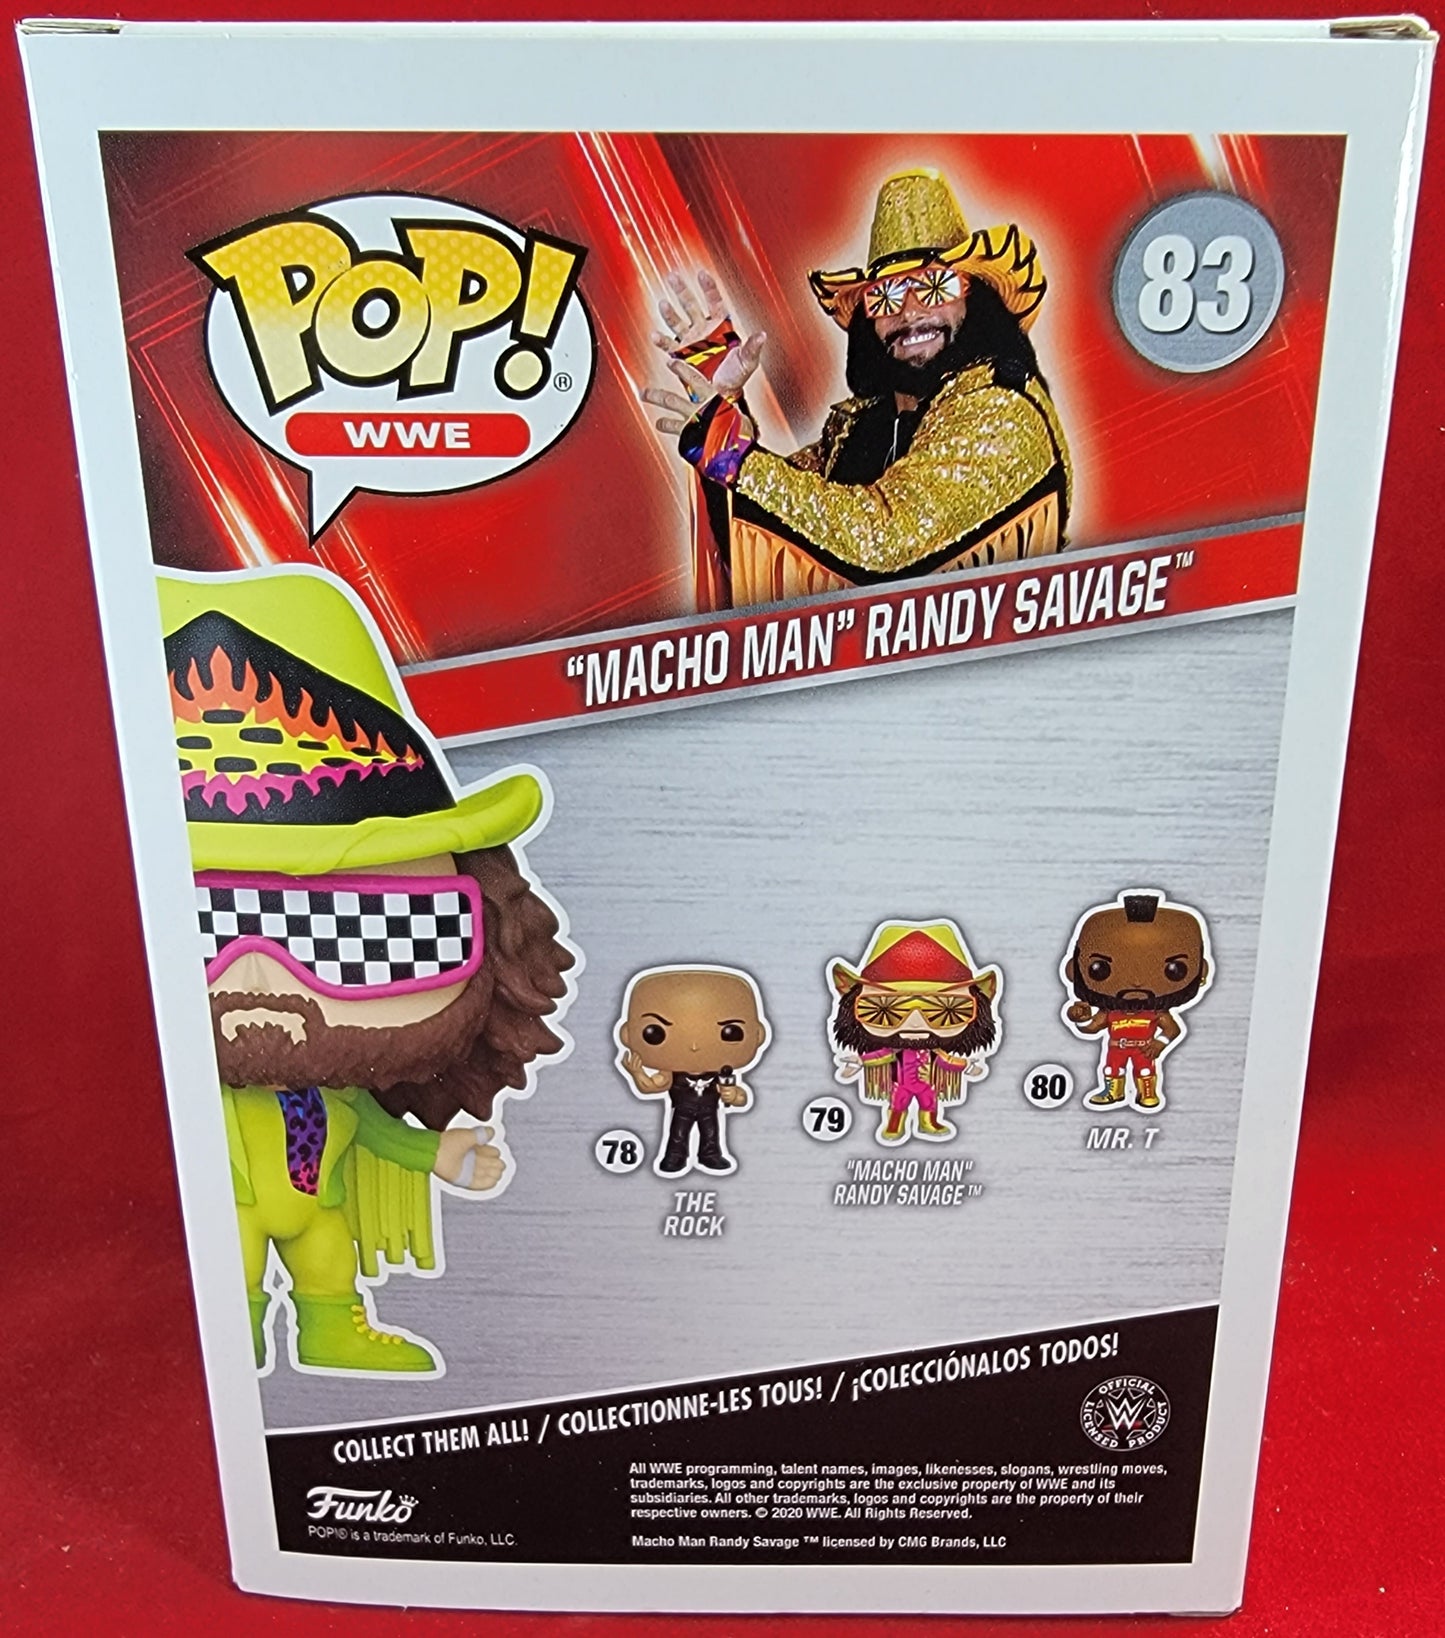 Macho man randy savage Wal-Mart exclusive funko # 83 (nib)
brand new randy savage funko pop. pop has macho man in lime green with racing flag glasses. pop has lite scratches on the plastic and will be shipped in a compatible pop protector.